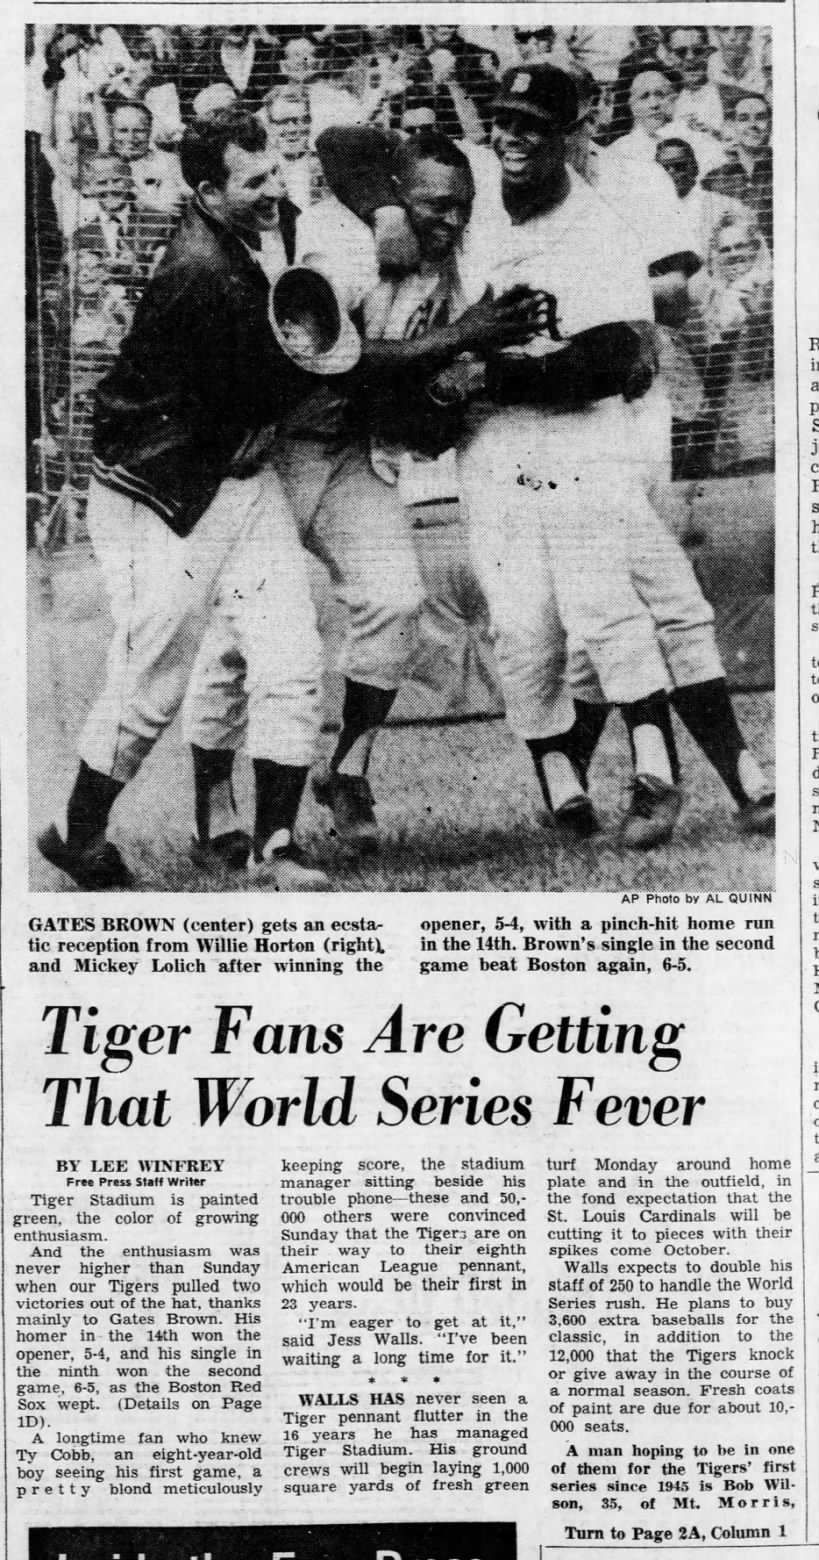 Mon 8/12/68: Pennant Fever sets in